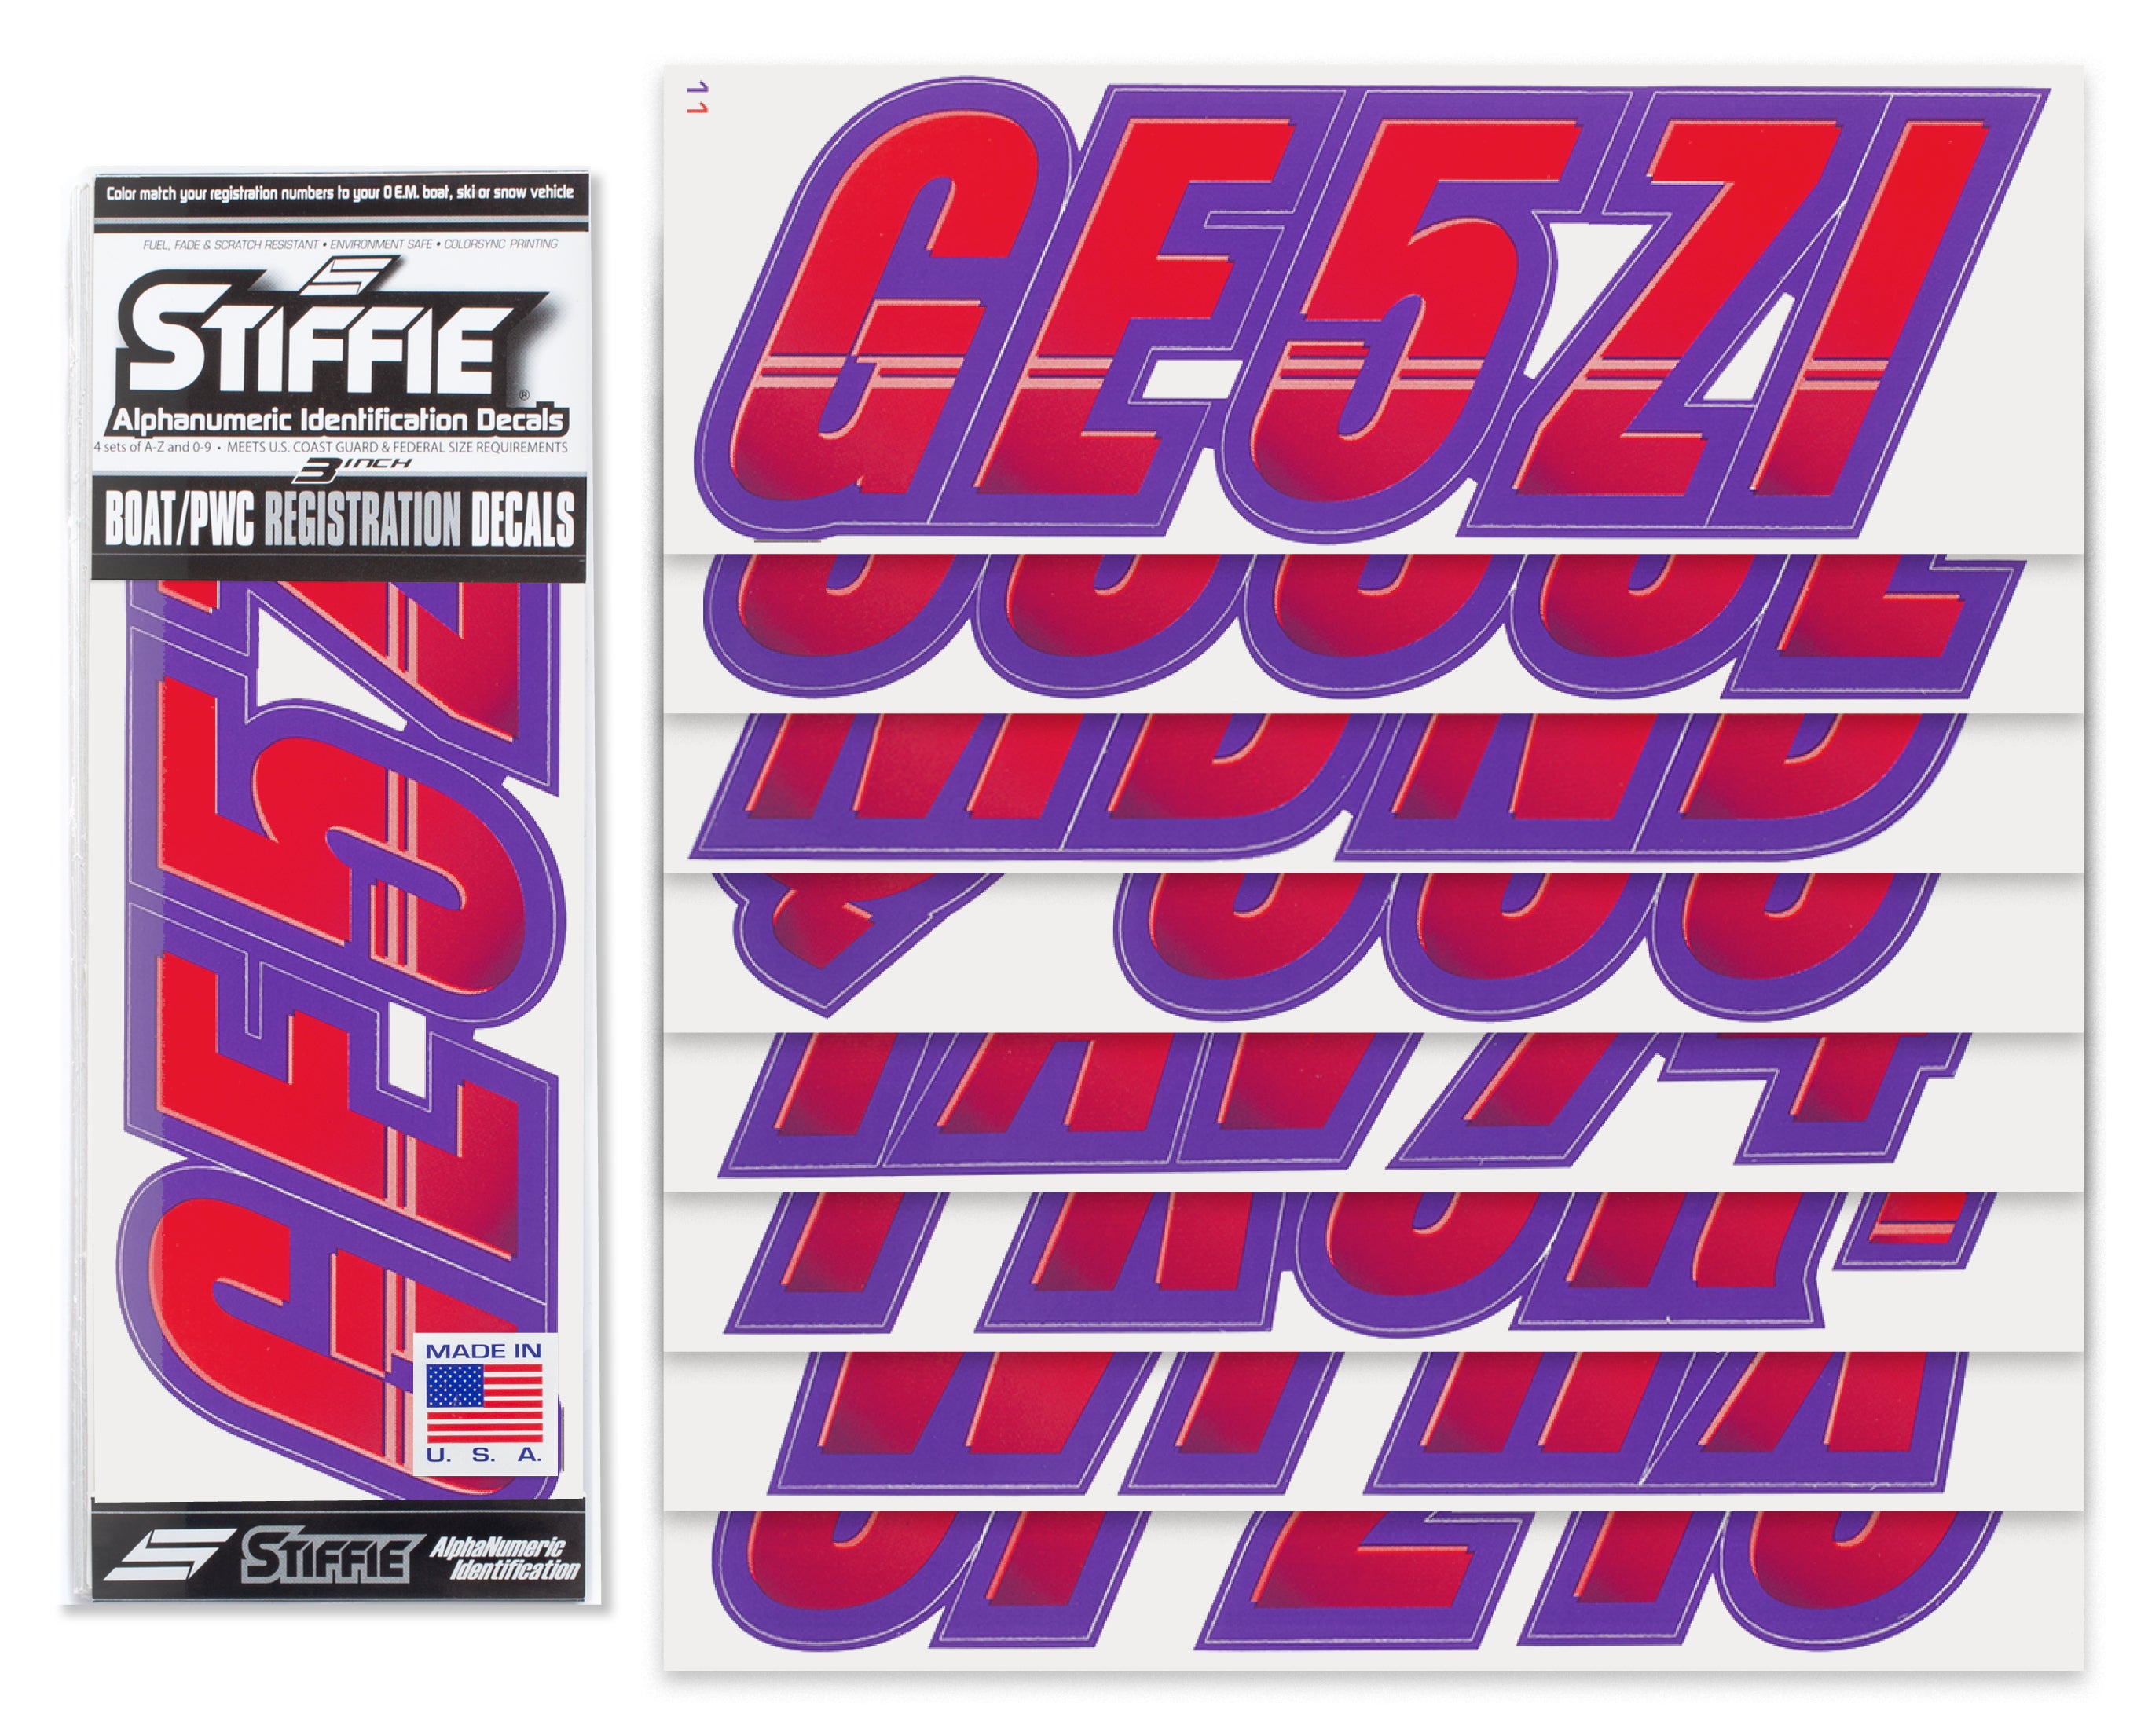 STIFFIE Techtron Red/Purple 3" Alpha-Numeric Registration Identification Numbers Stickers Decals for Boats & Personal Watercraft